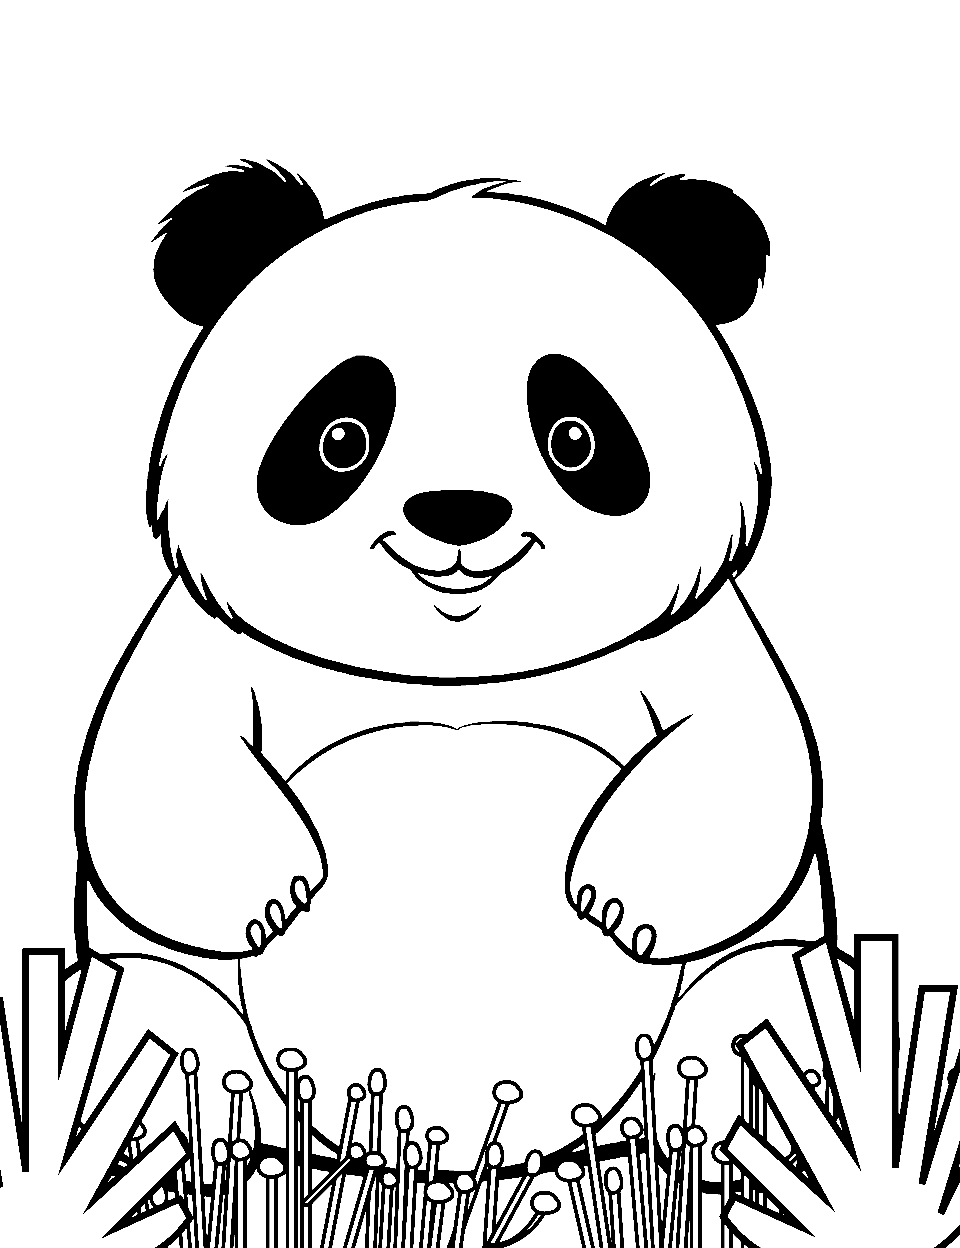 Chubby Panda Coloring Page - A pudgy panda seated comfortably, belly out, and a satisfied expression on its face.